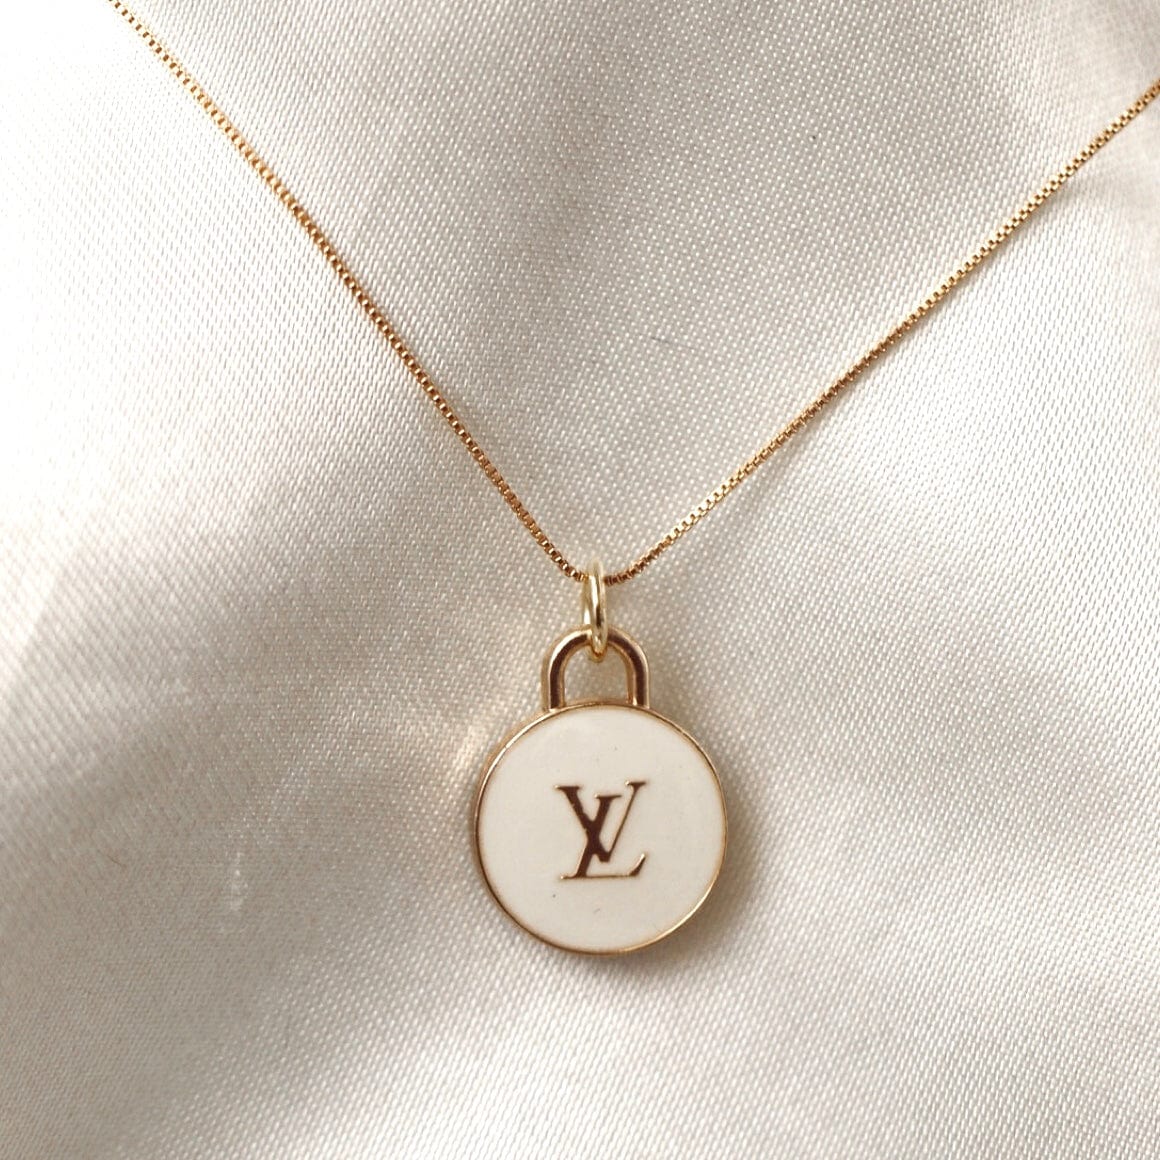 Used LV Necklace] Louis Vuitton Popular Charm Necklace Pole